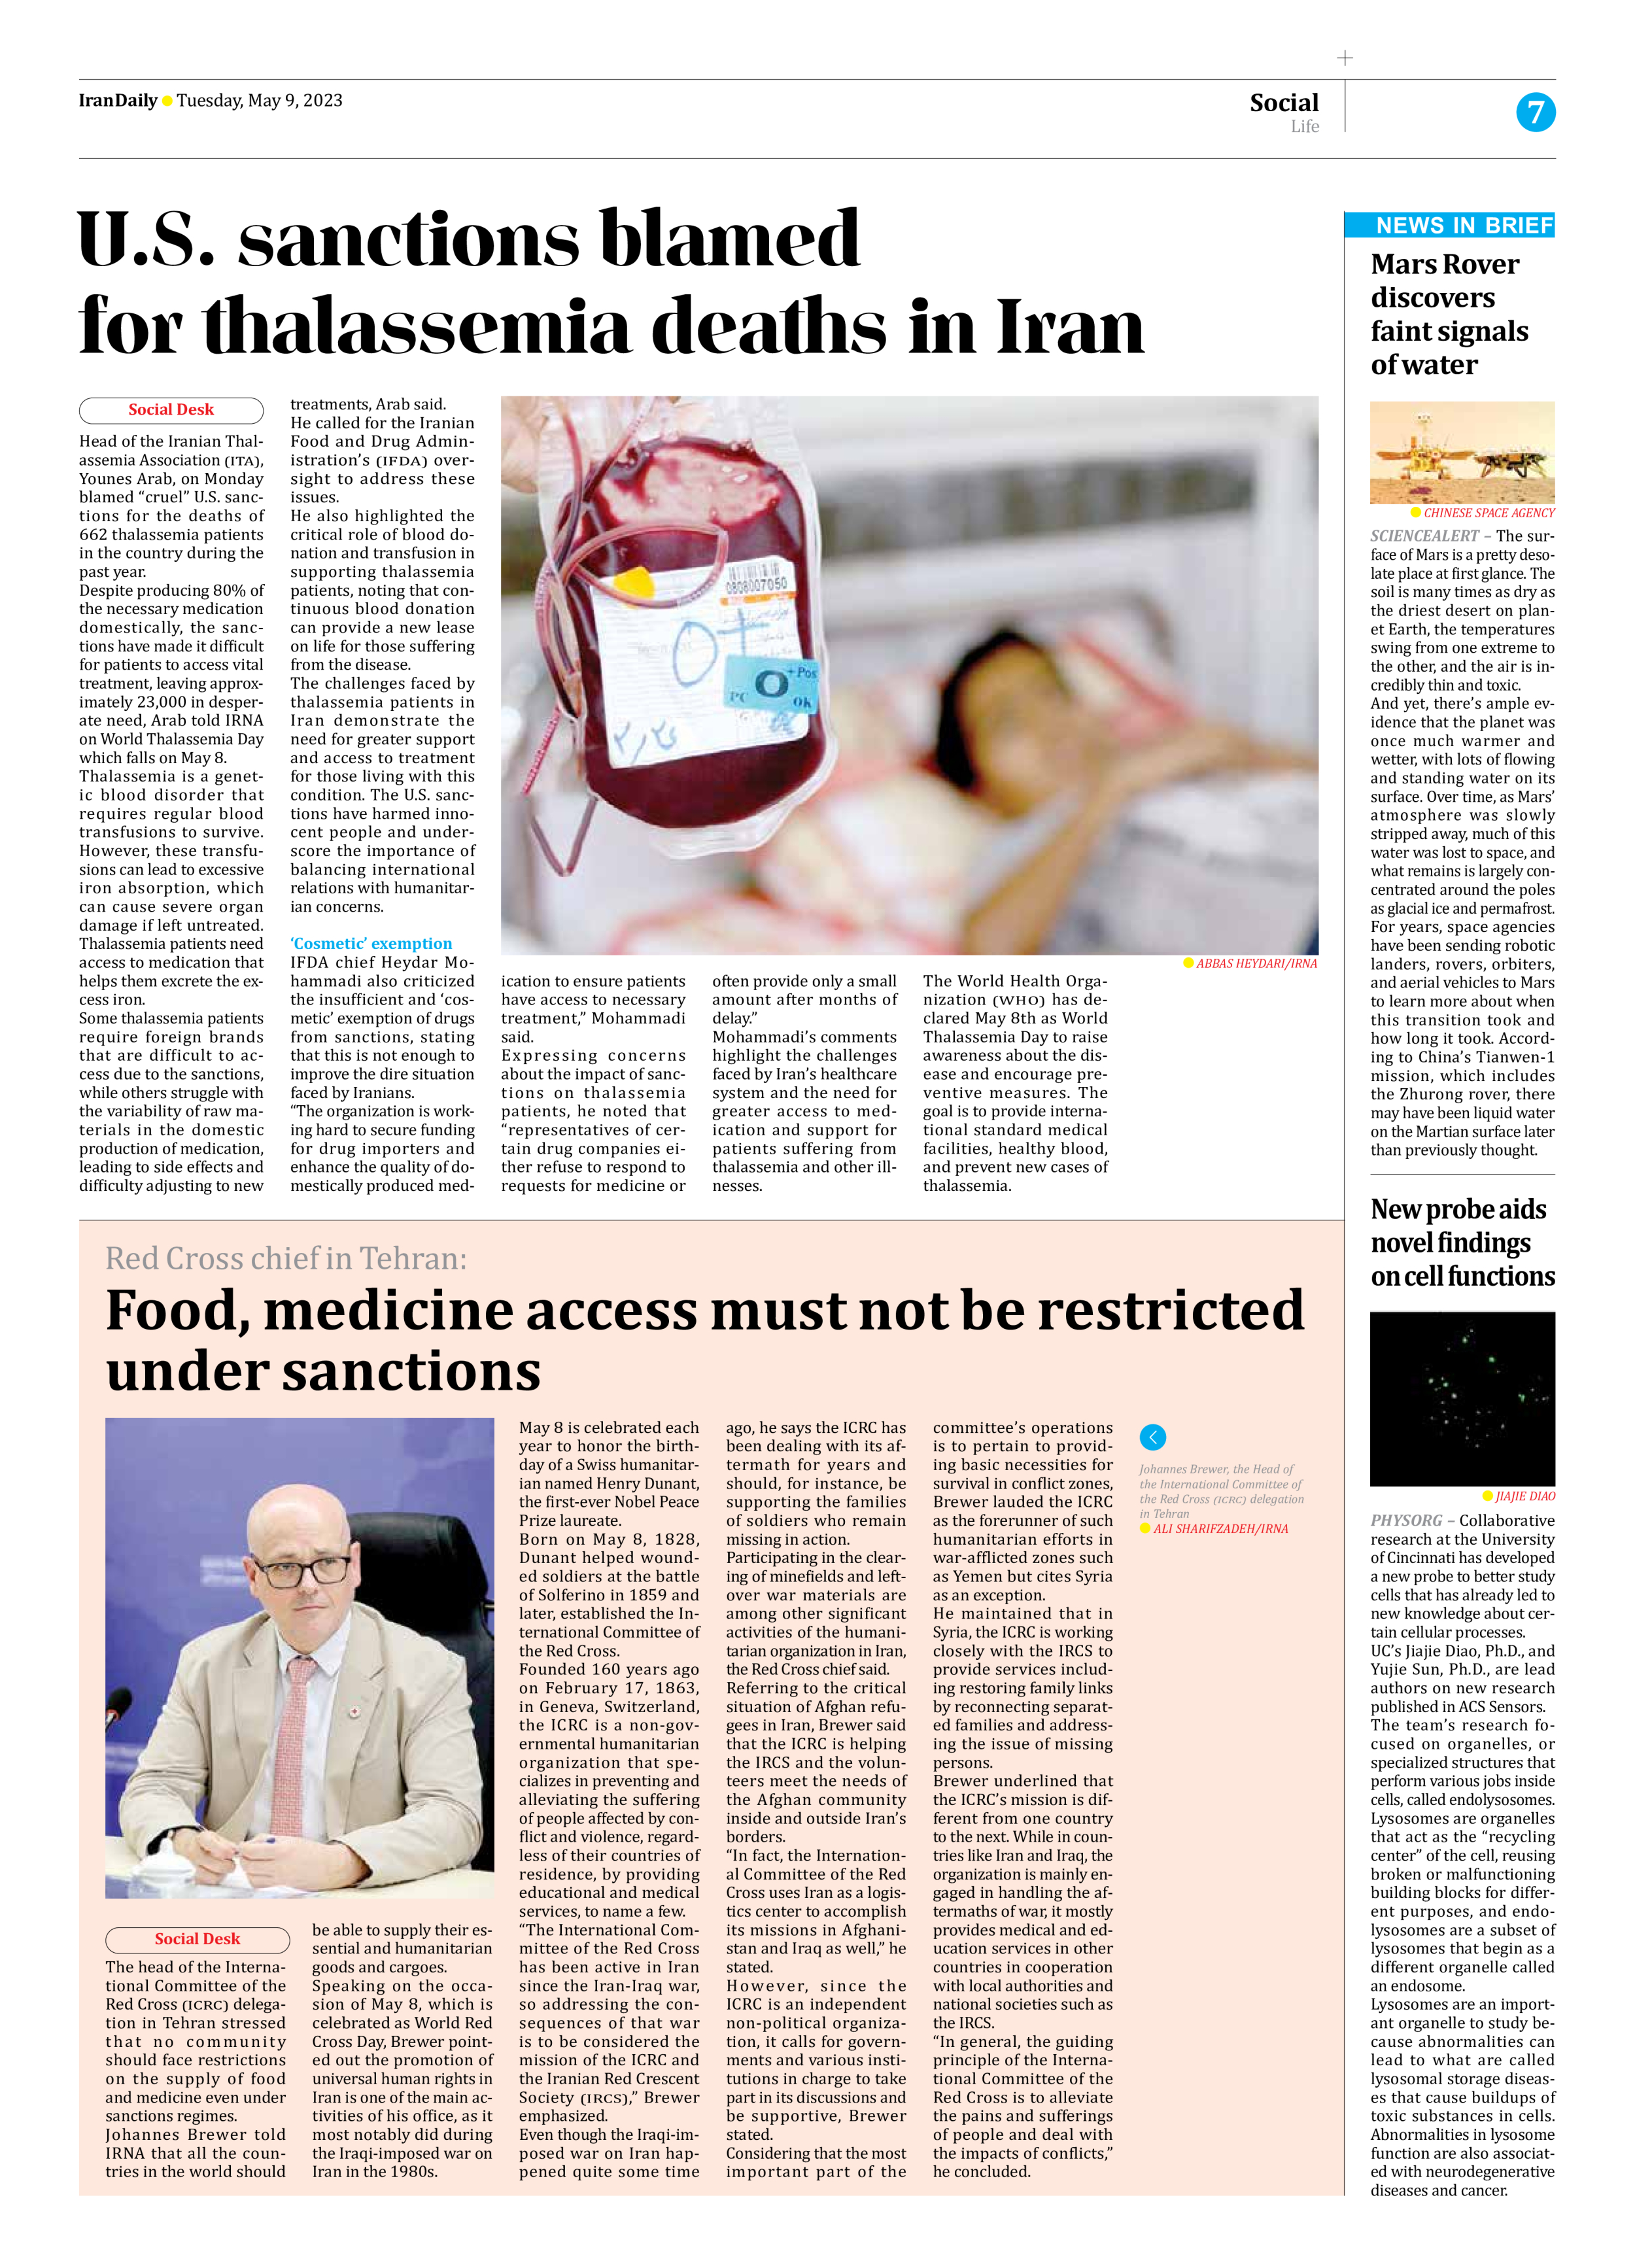 Iran Daily - Number Seven Thousand Two Hundred and Eighty Seven - 09 May 2023 - Page 7